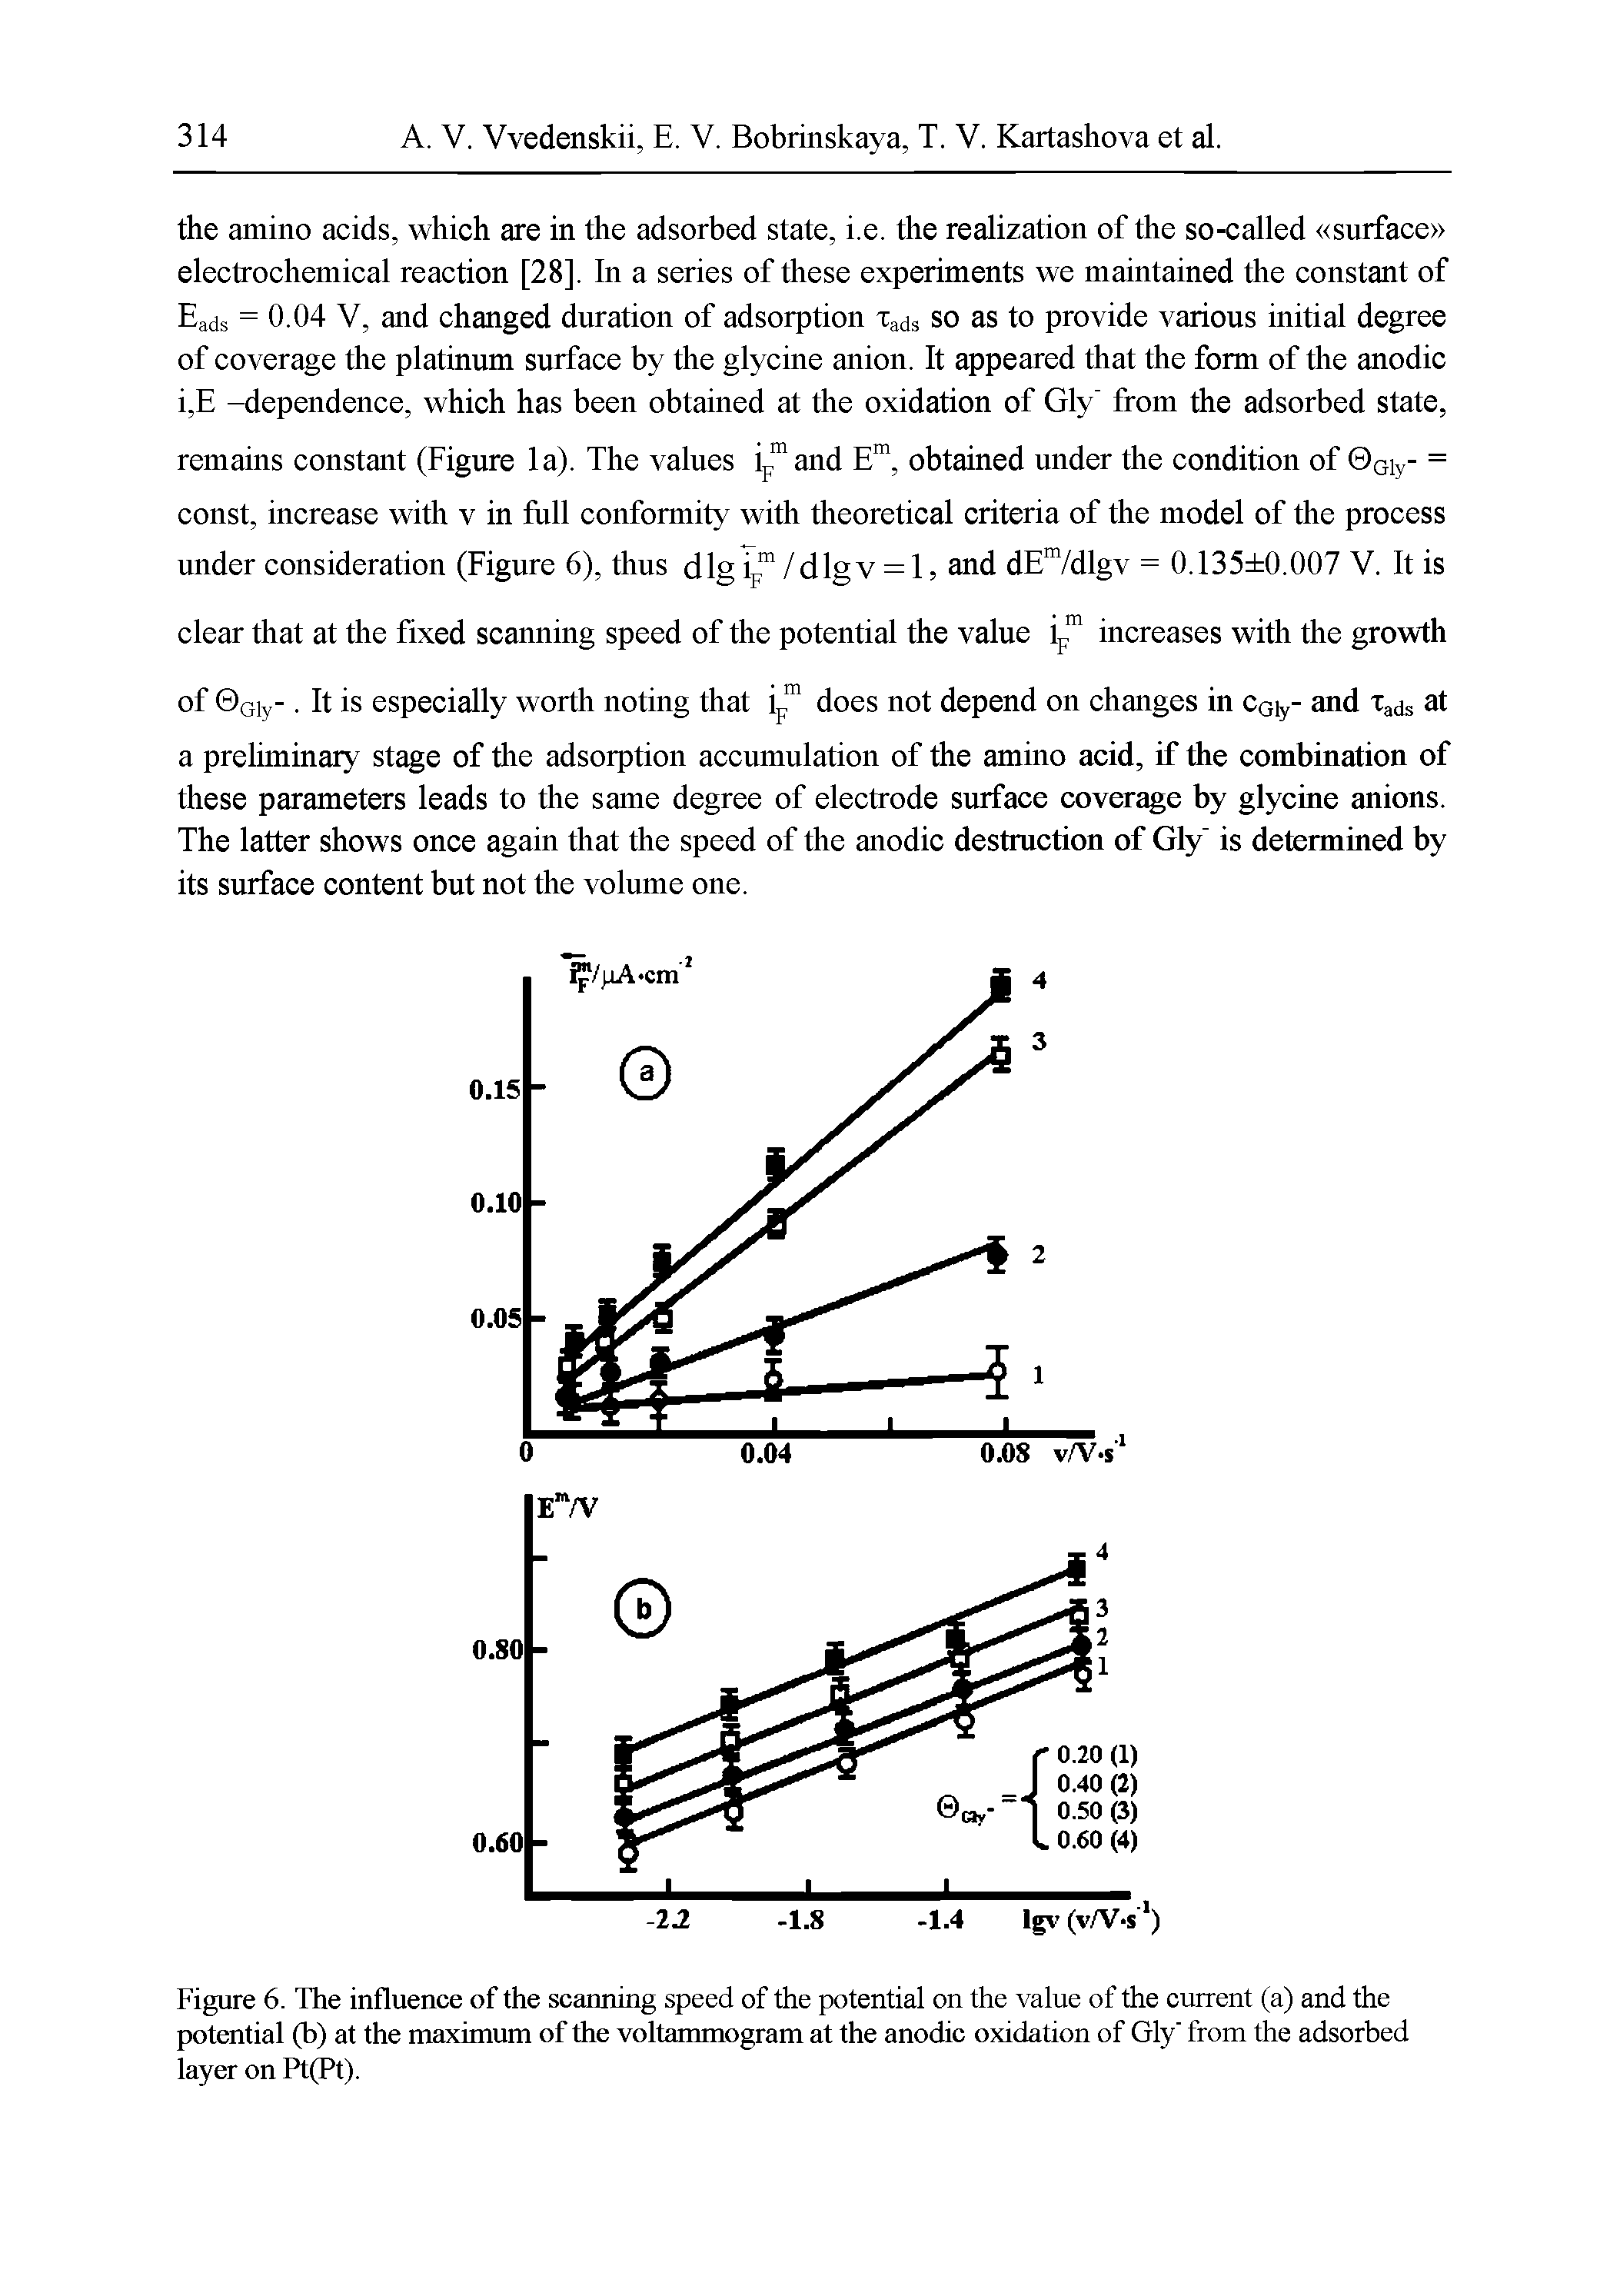 Figure 6. The influence of the scanning speed of the potential on the value of the current (a) and the potential (b) at the maximum of the voltammogram at the anodic oxidation of Gly from the adsorbed layer on R(Pt).